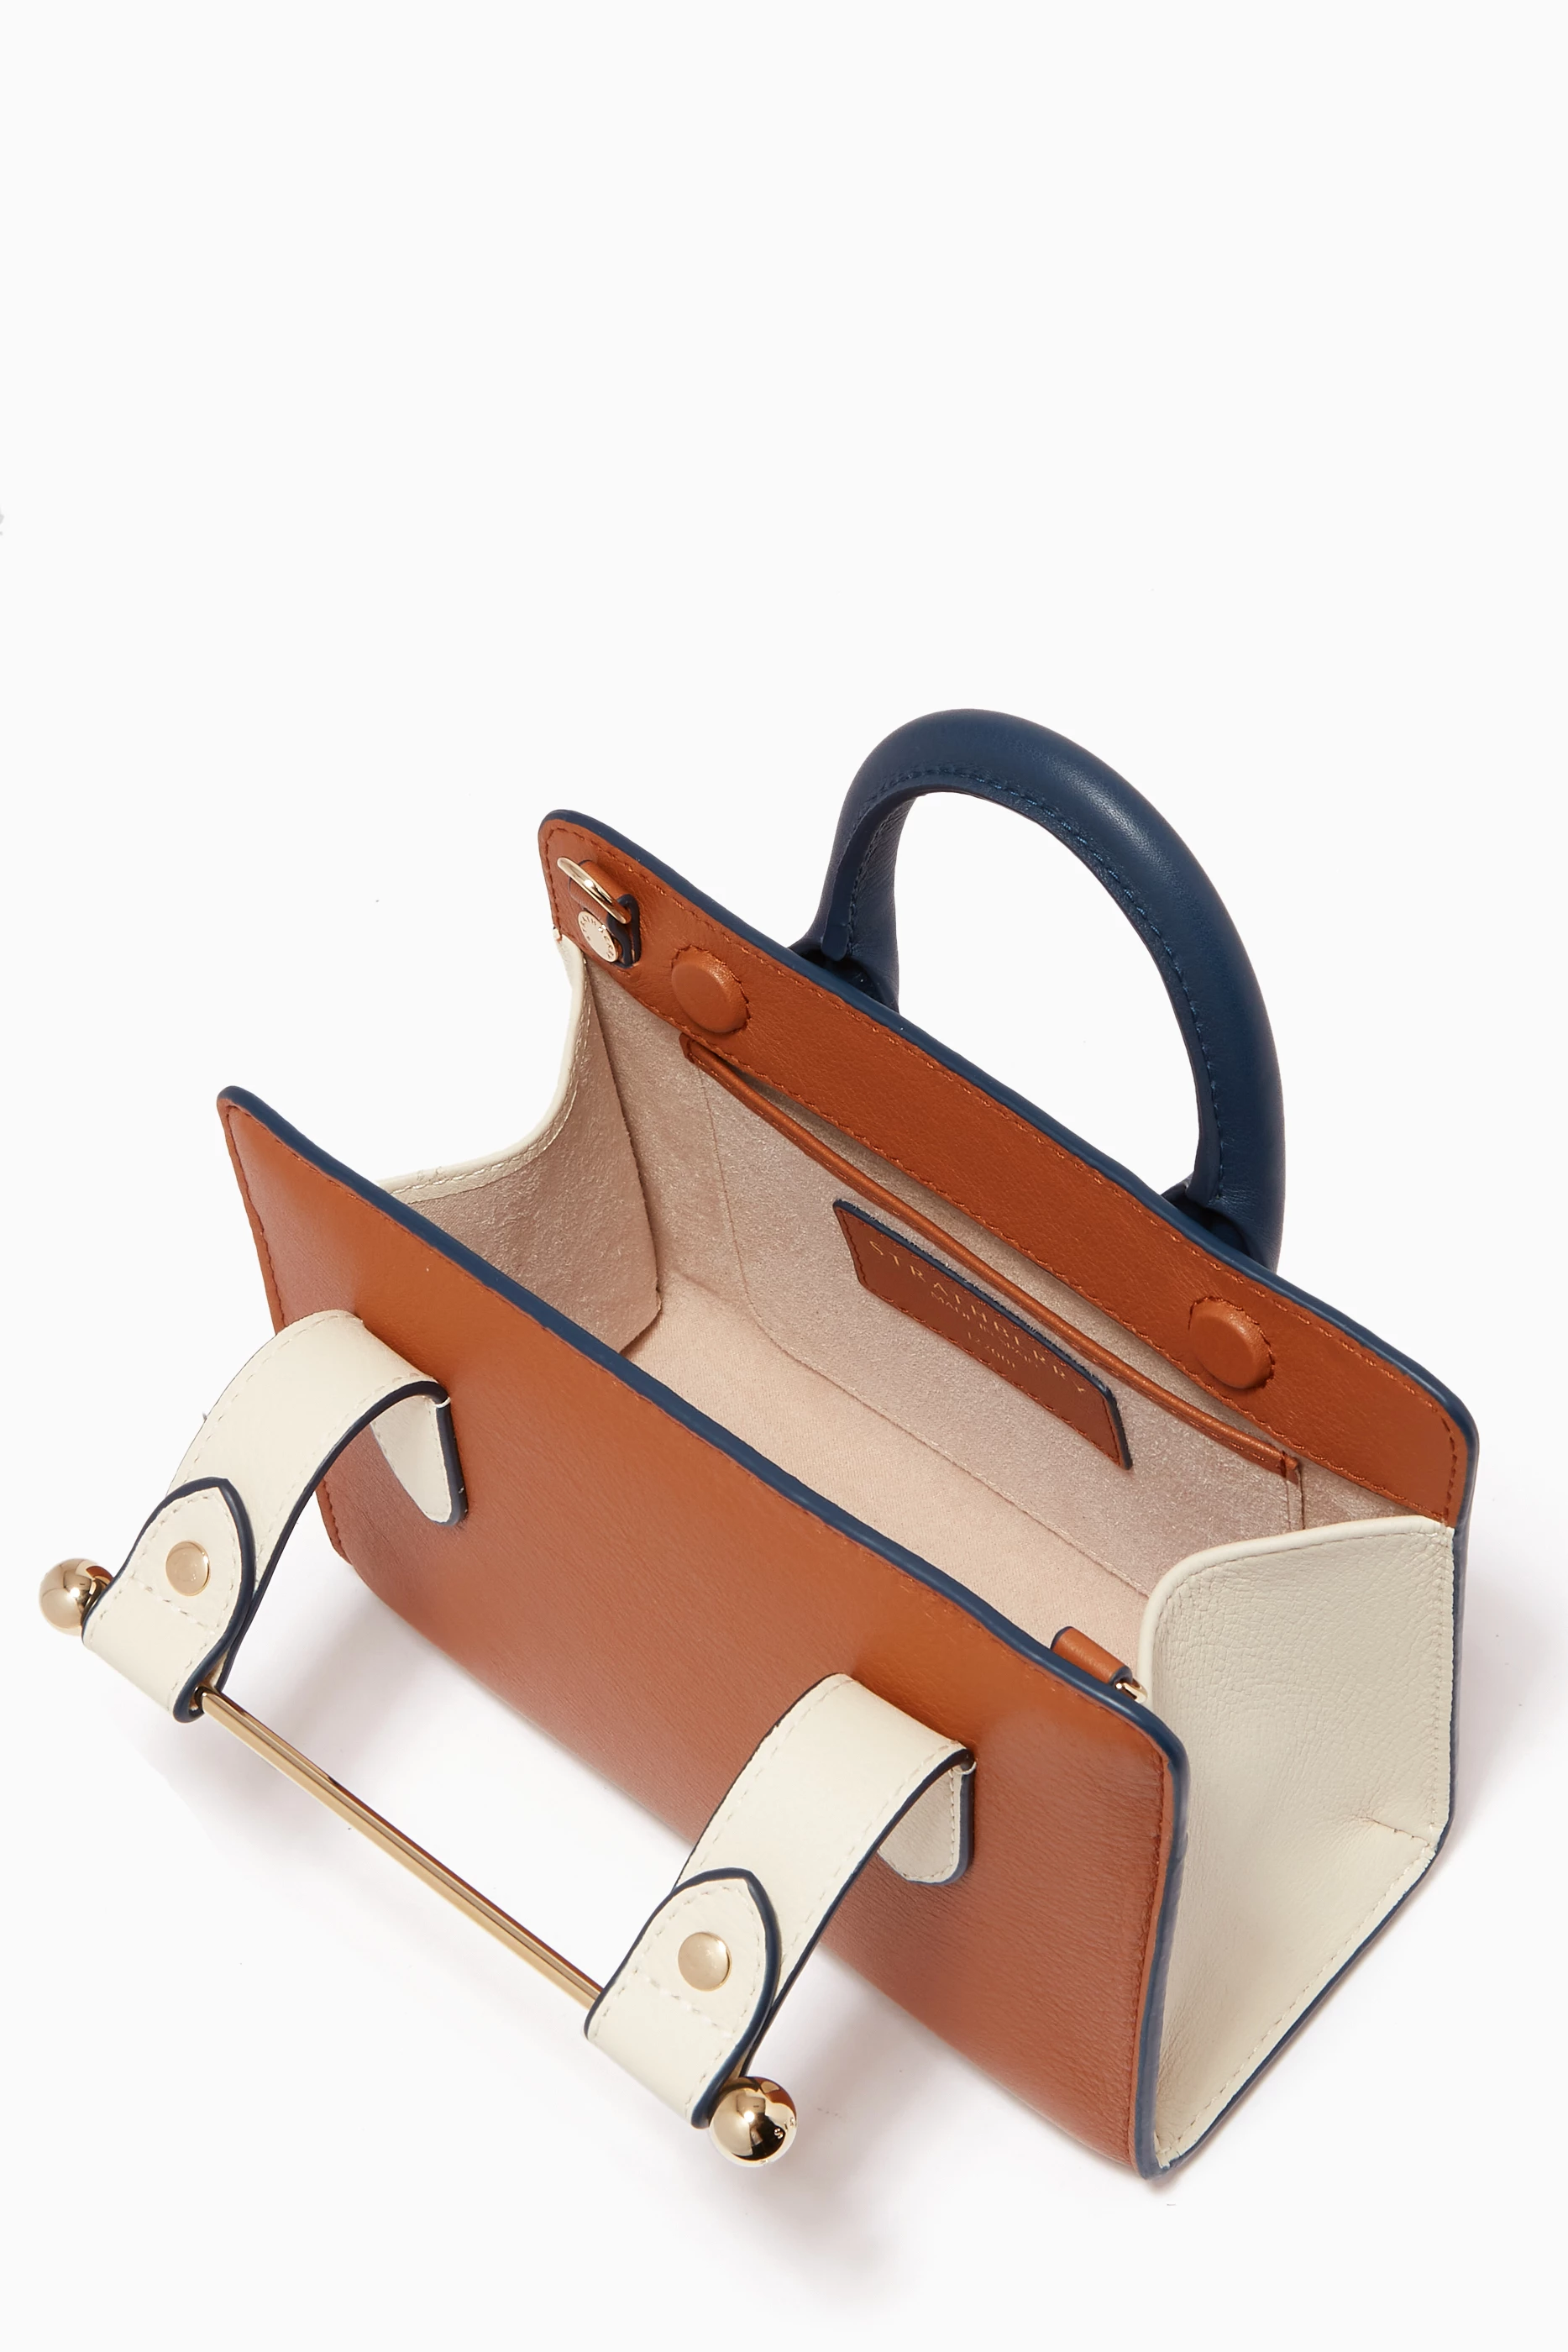 BROWN STRATHBERRY 'NANO TOTE' LEATHER BAG (20204100175)